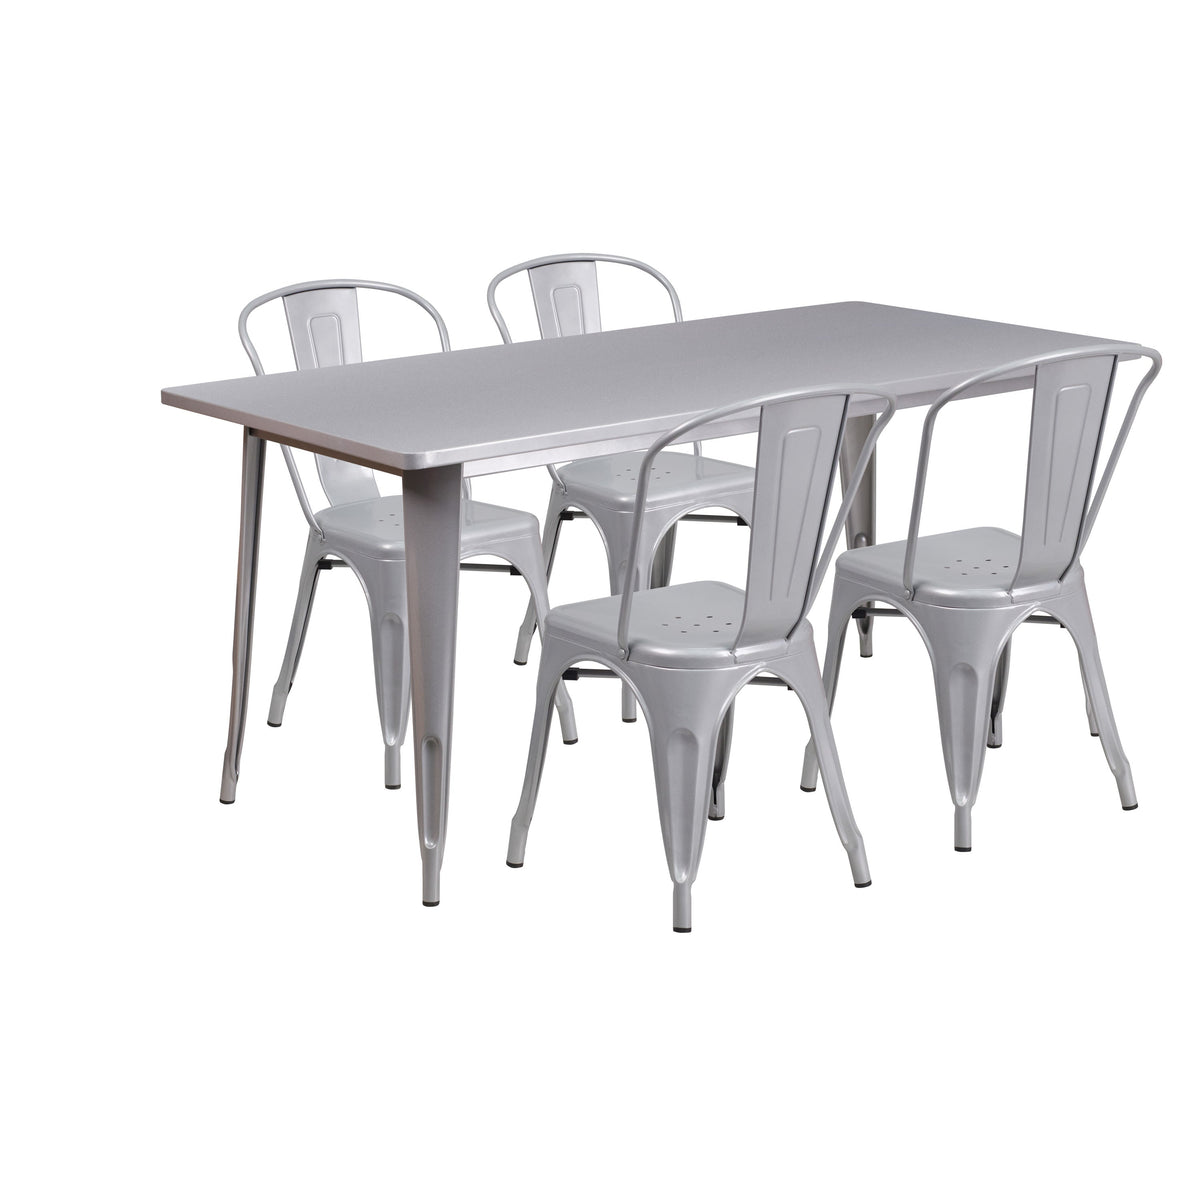 Silver |#| 31.5inch x 63inch Rectangular Silver Metal Indoor-Outdoor Table Set w/ 4 Stack Chairs